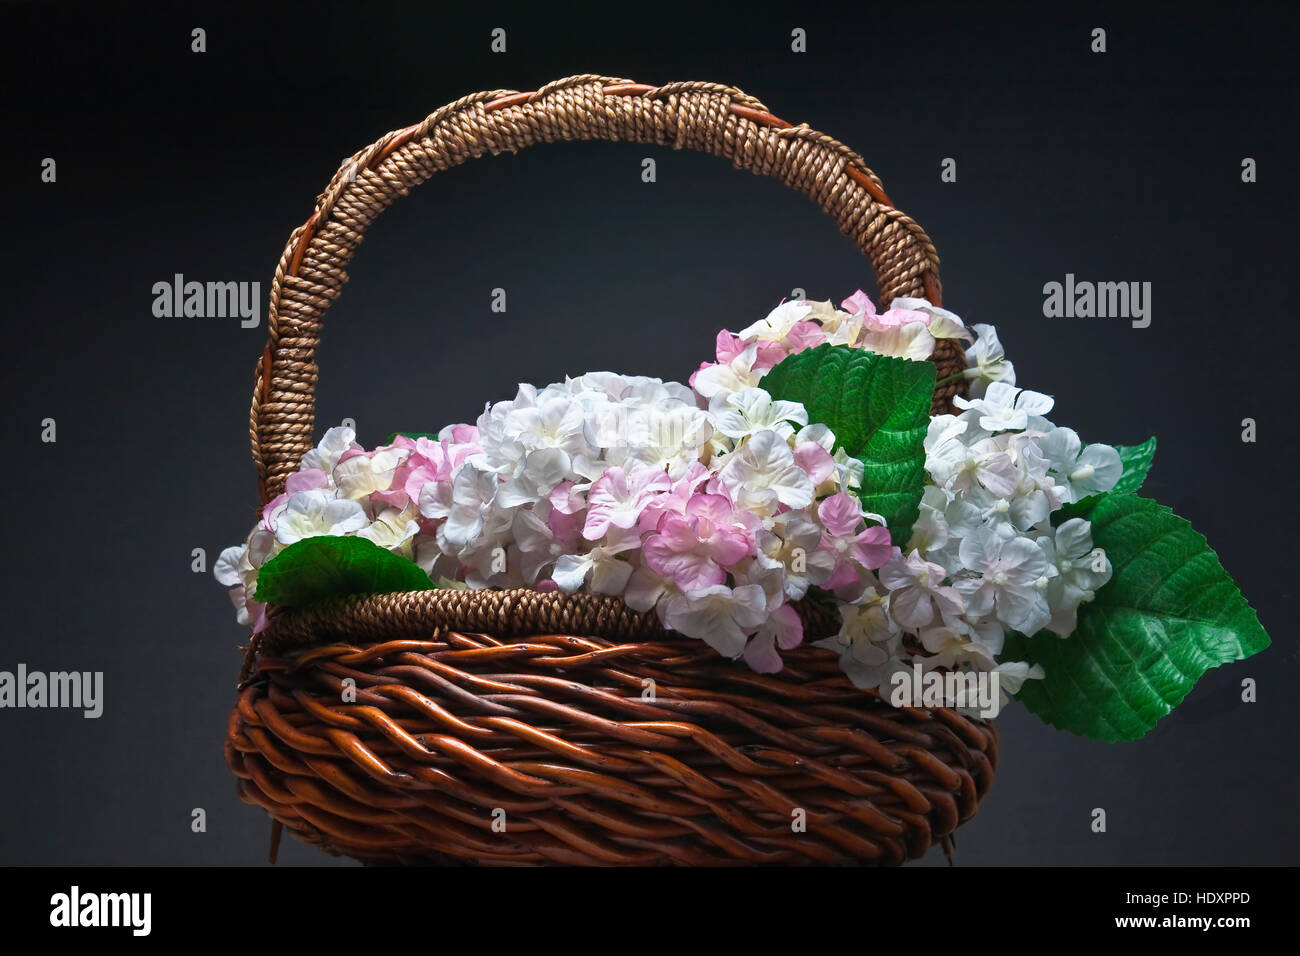 Basket of artificial flowers against black background Stock Photo